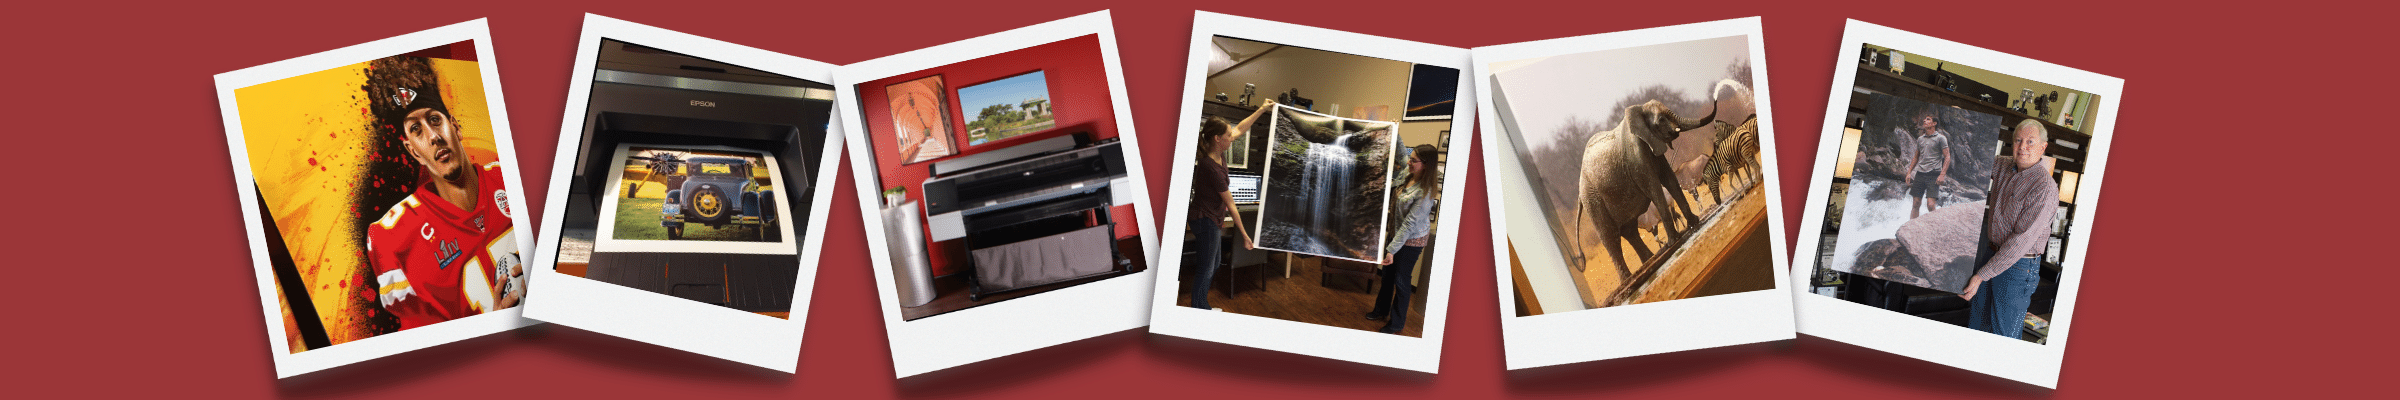 Photo Collage with 6 images - images of art and photography being printed, wrapped in canvas, etc...